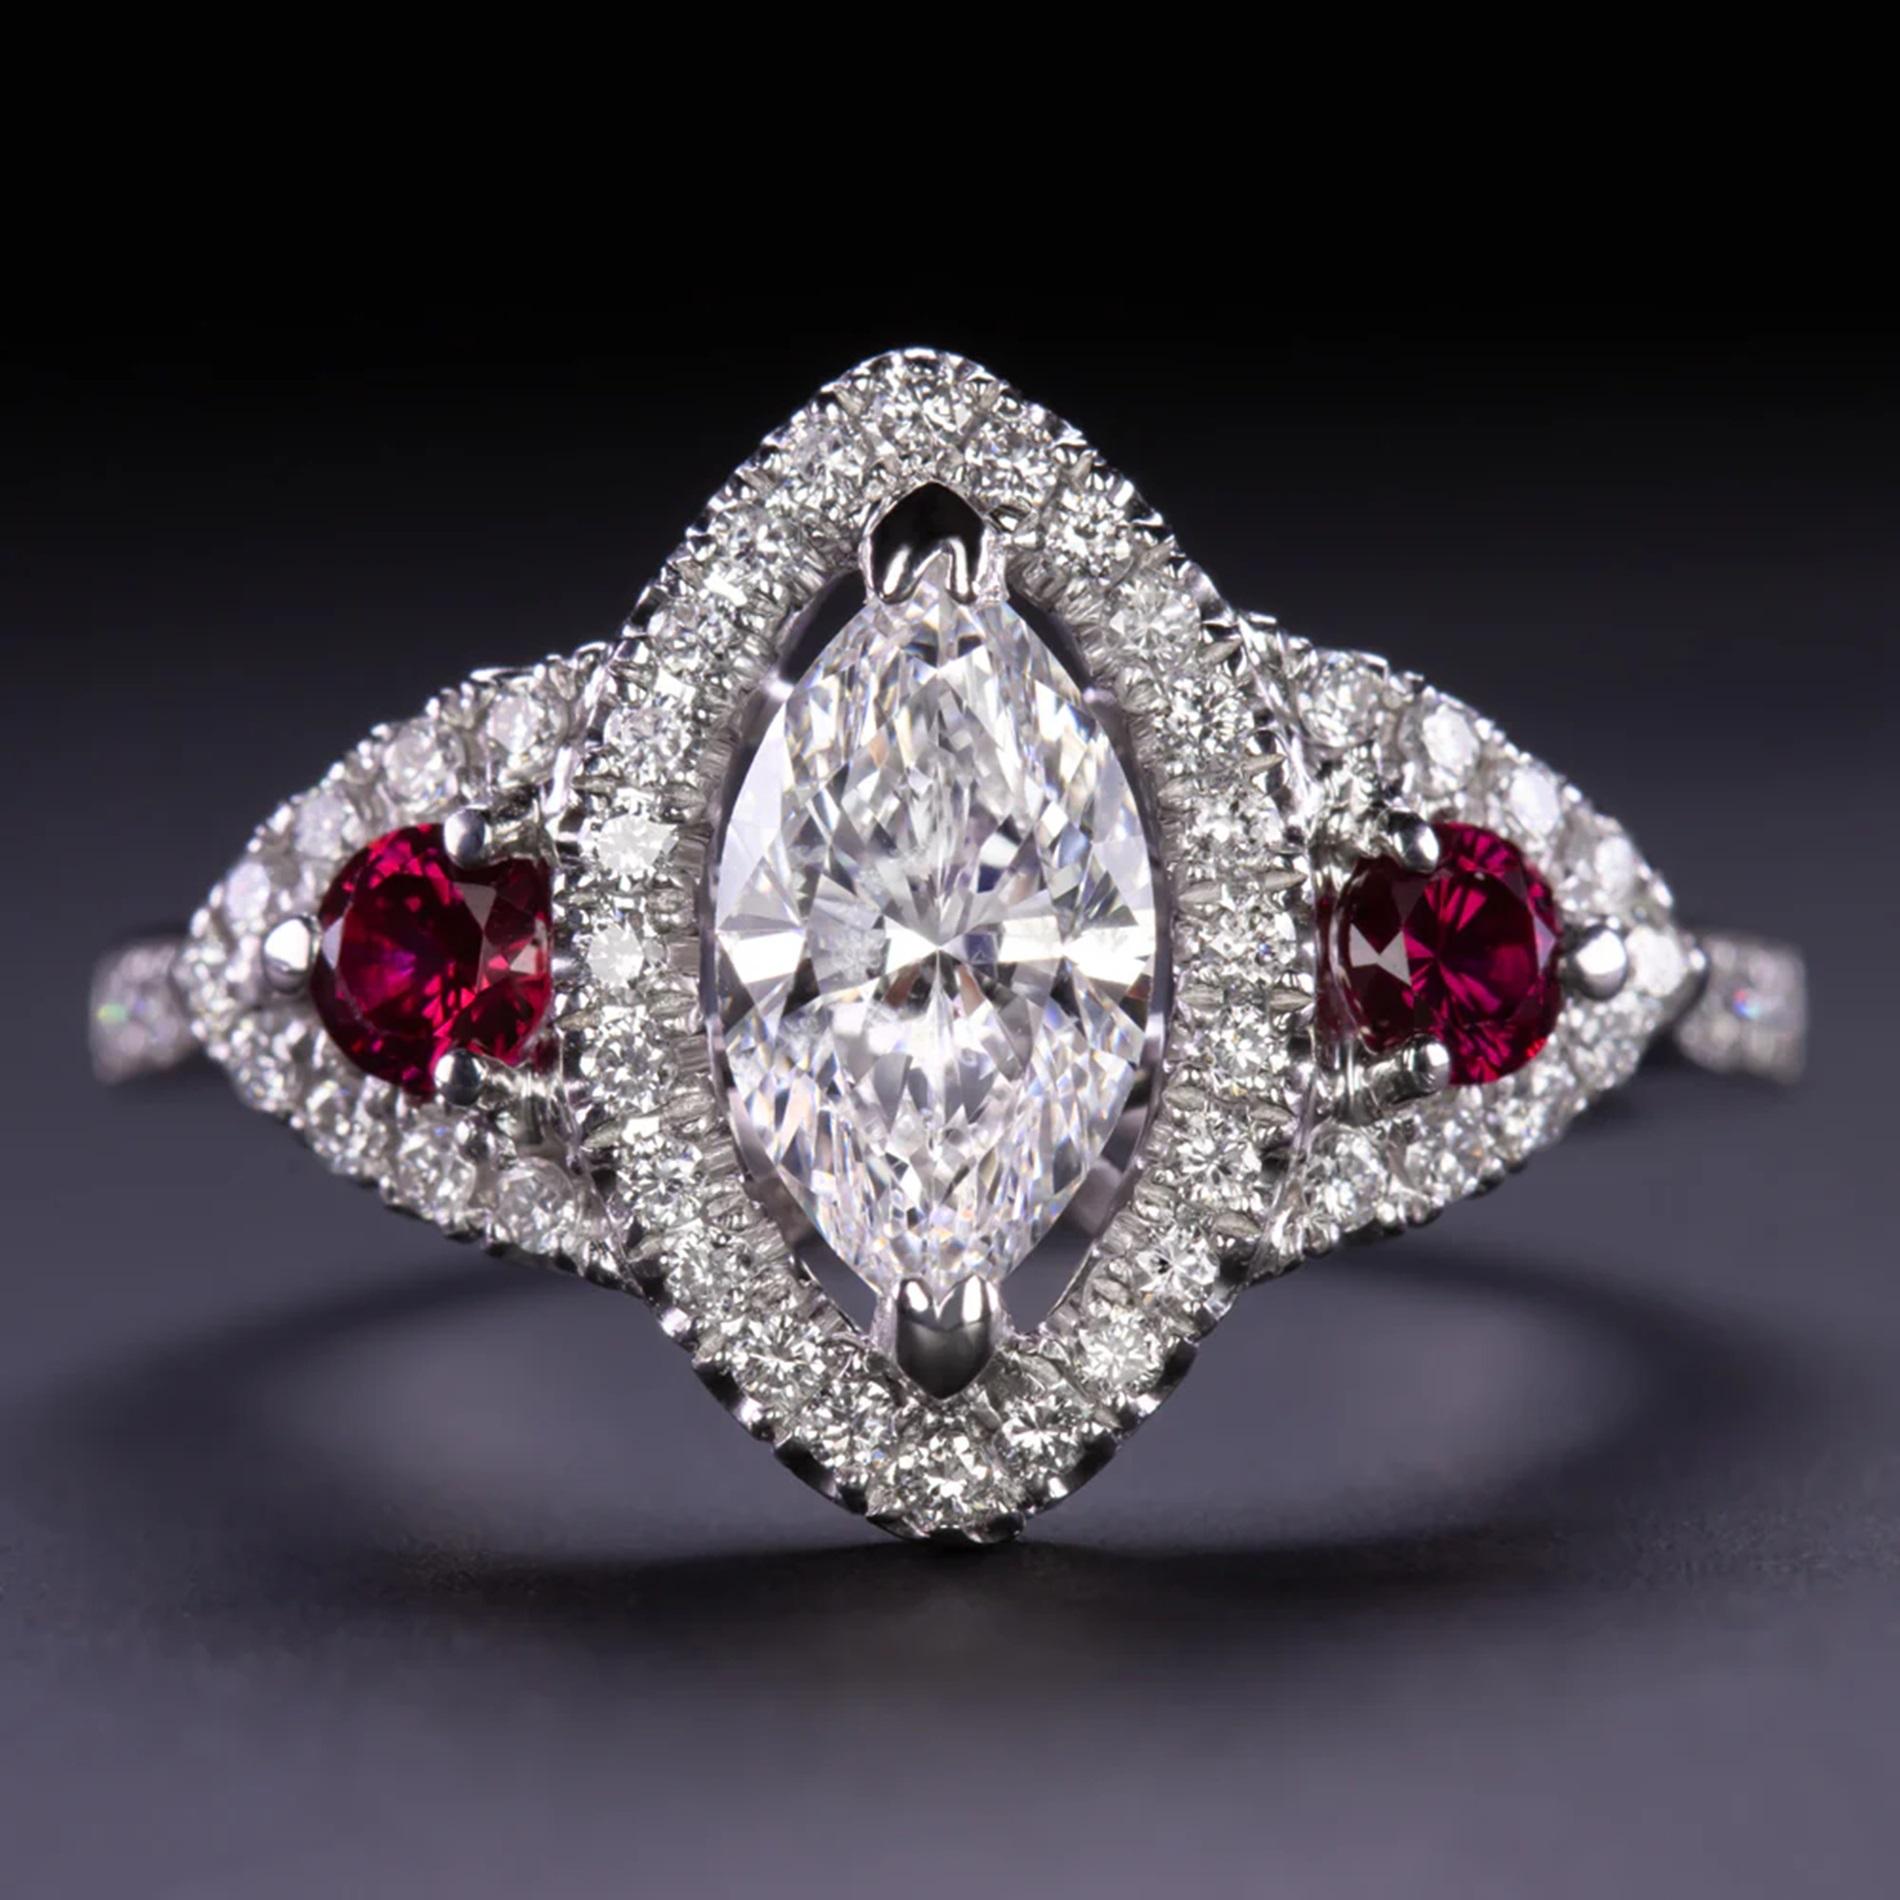 Mesmerizing Three Stone Ring

Grace your hand with the timeless elegance of our striking three stone ring. At its core, a vibrant 0.75ct marquise-cut diamond steals the spotlight, flanked by lustrous red rubies and encircled by a halo of glittering